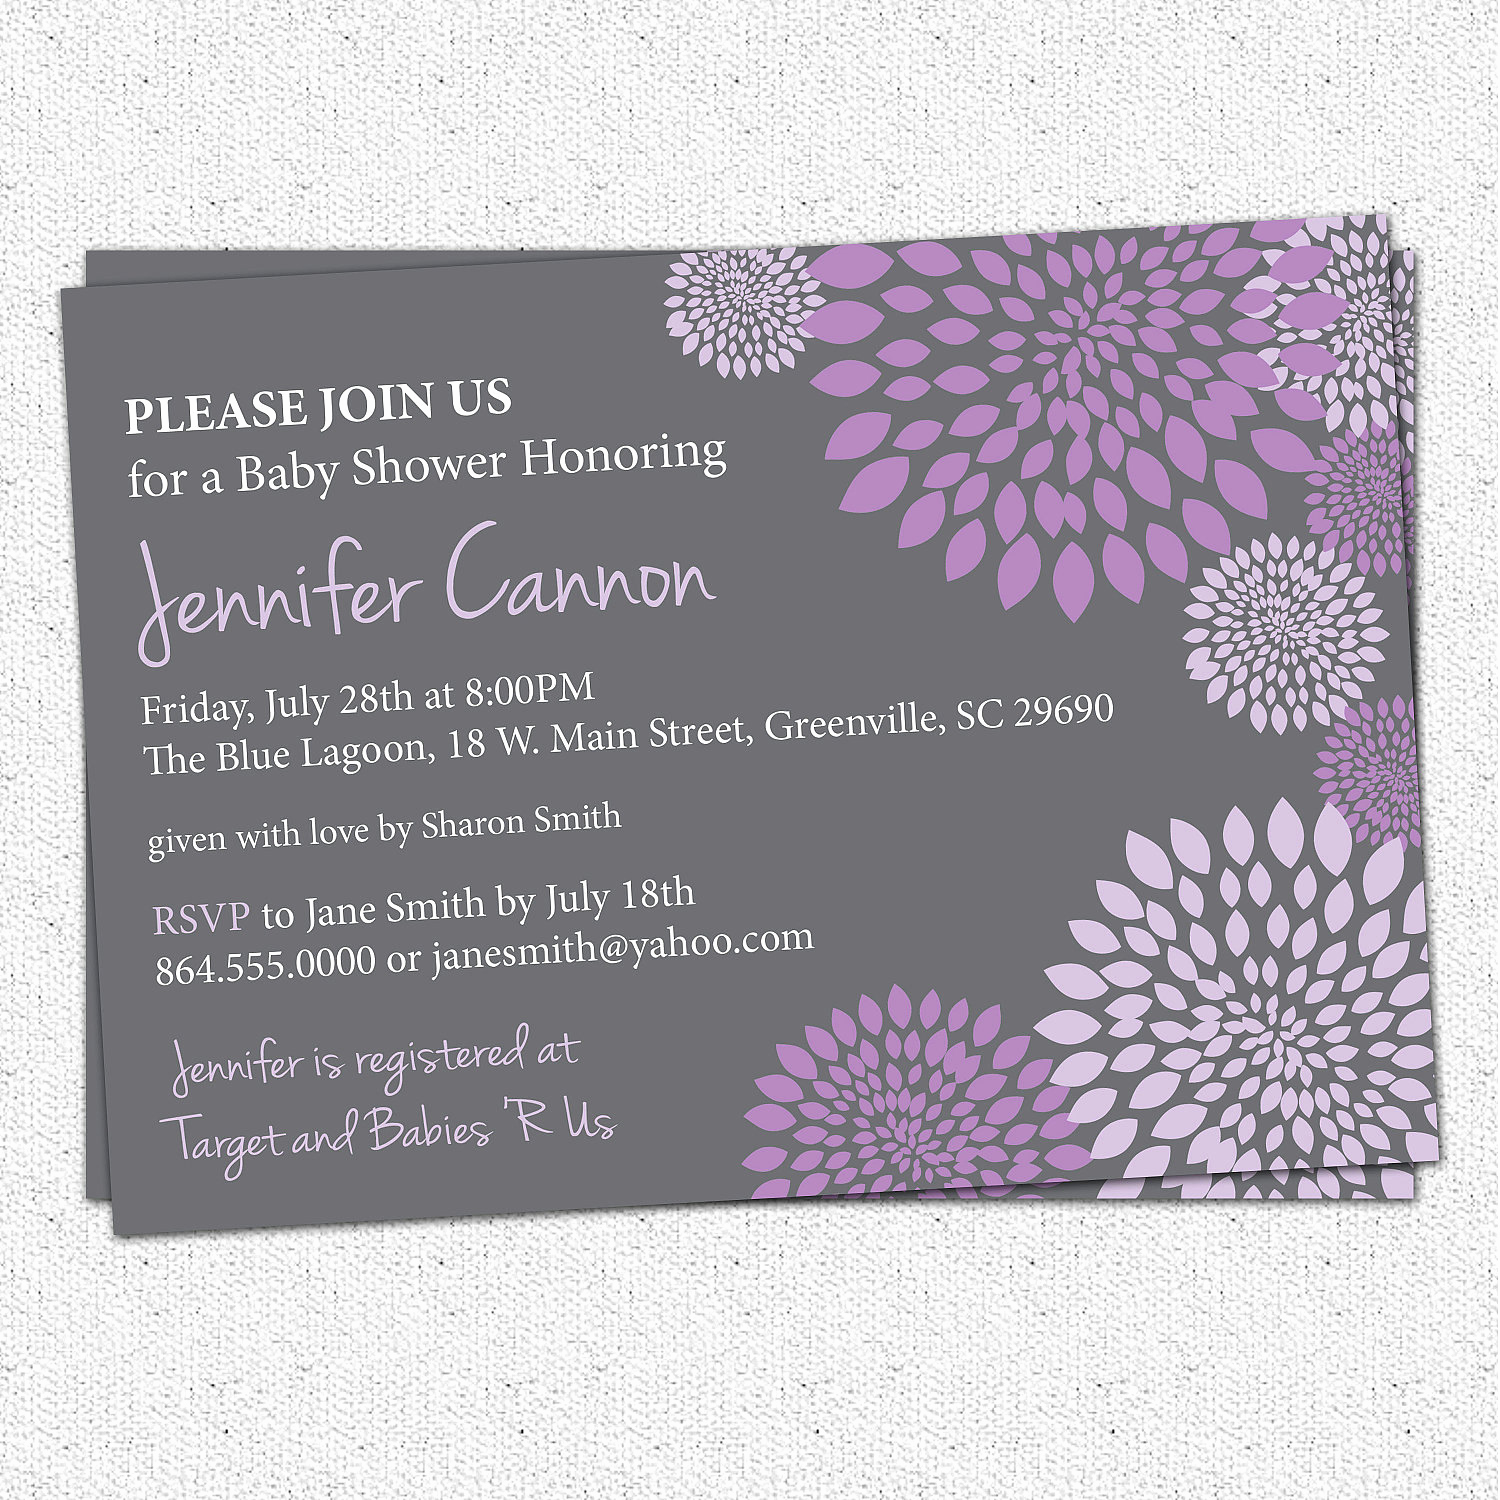 Bridal Shower Invitation Images Inspirational Baby Bridal Shower Invitation Printable Girl Purple and